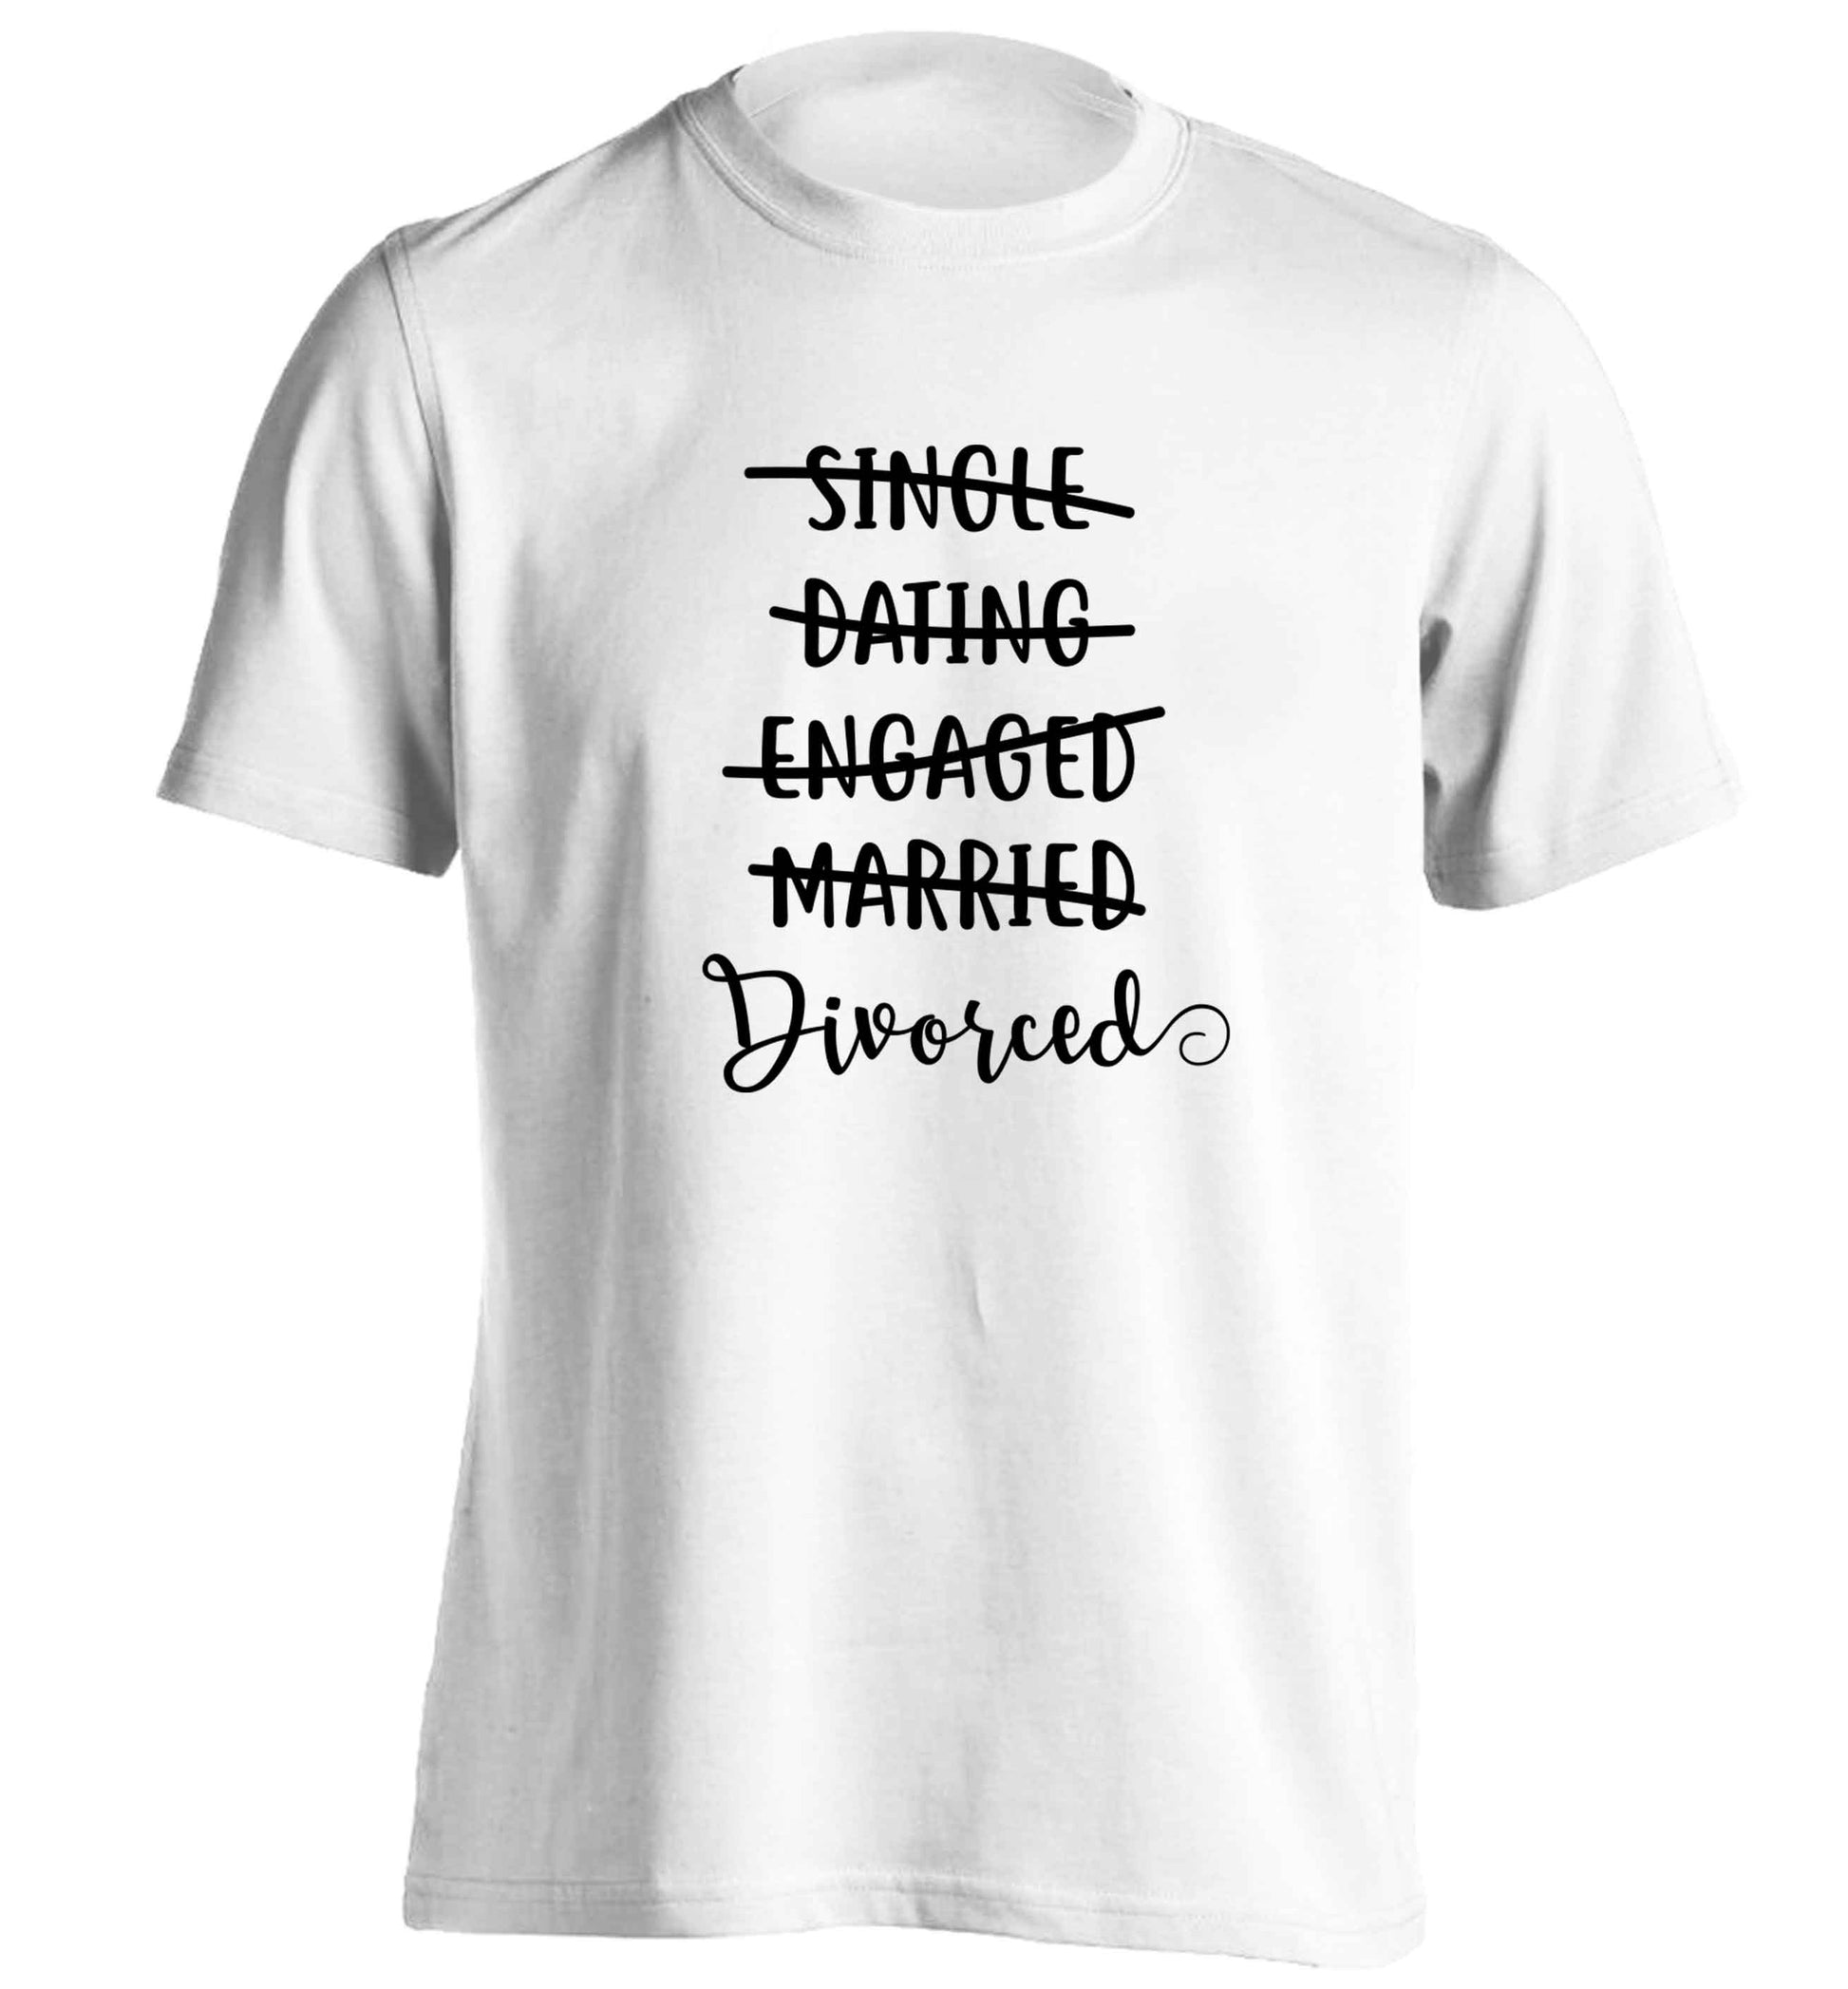 Single, dating, engaged, divorced adults unisex white Tshirt 2XL